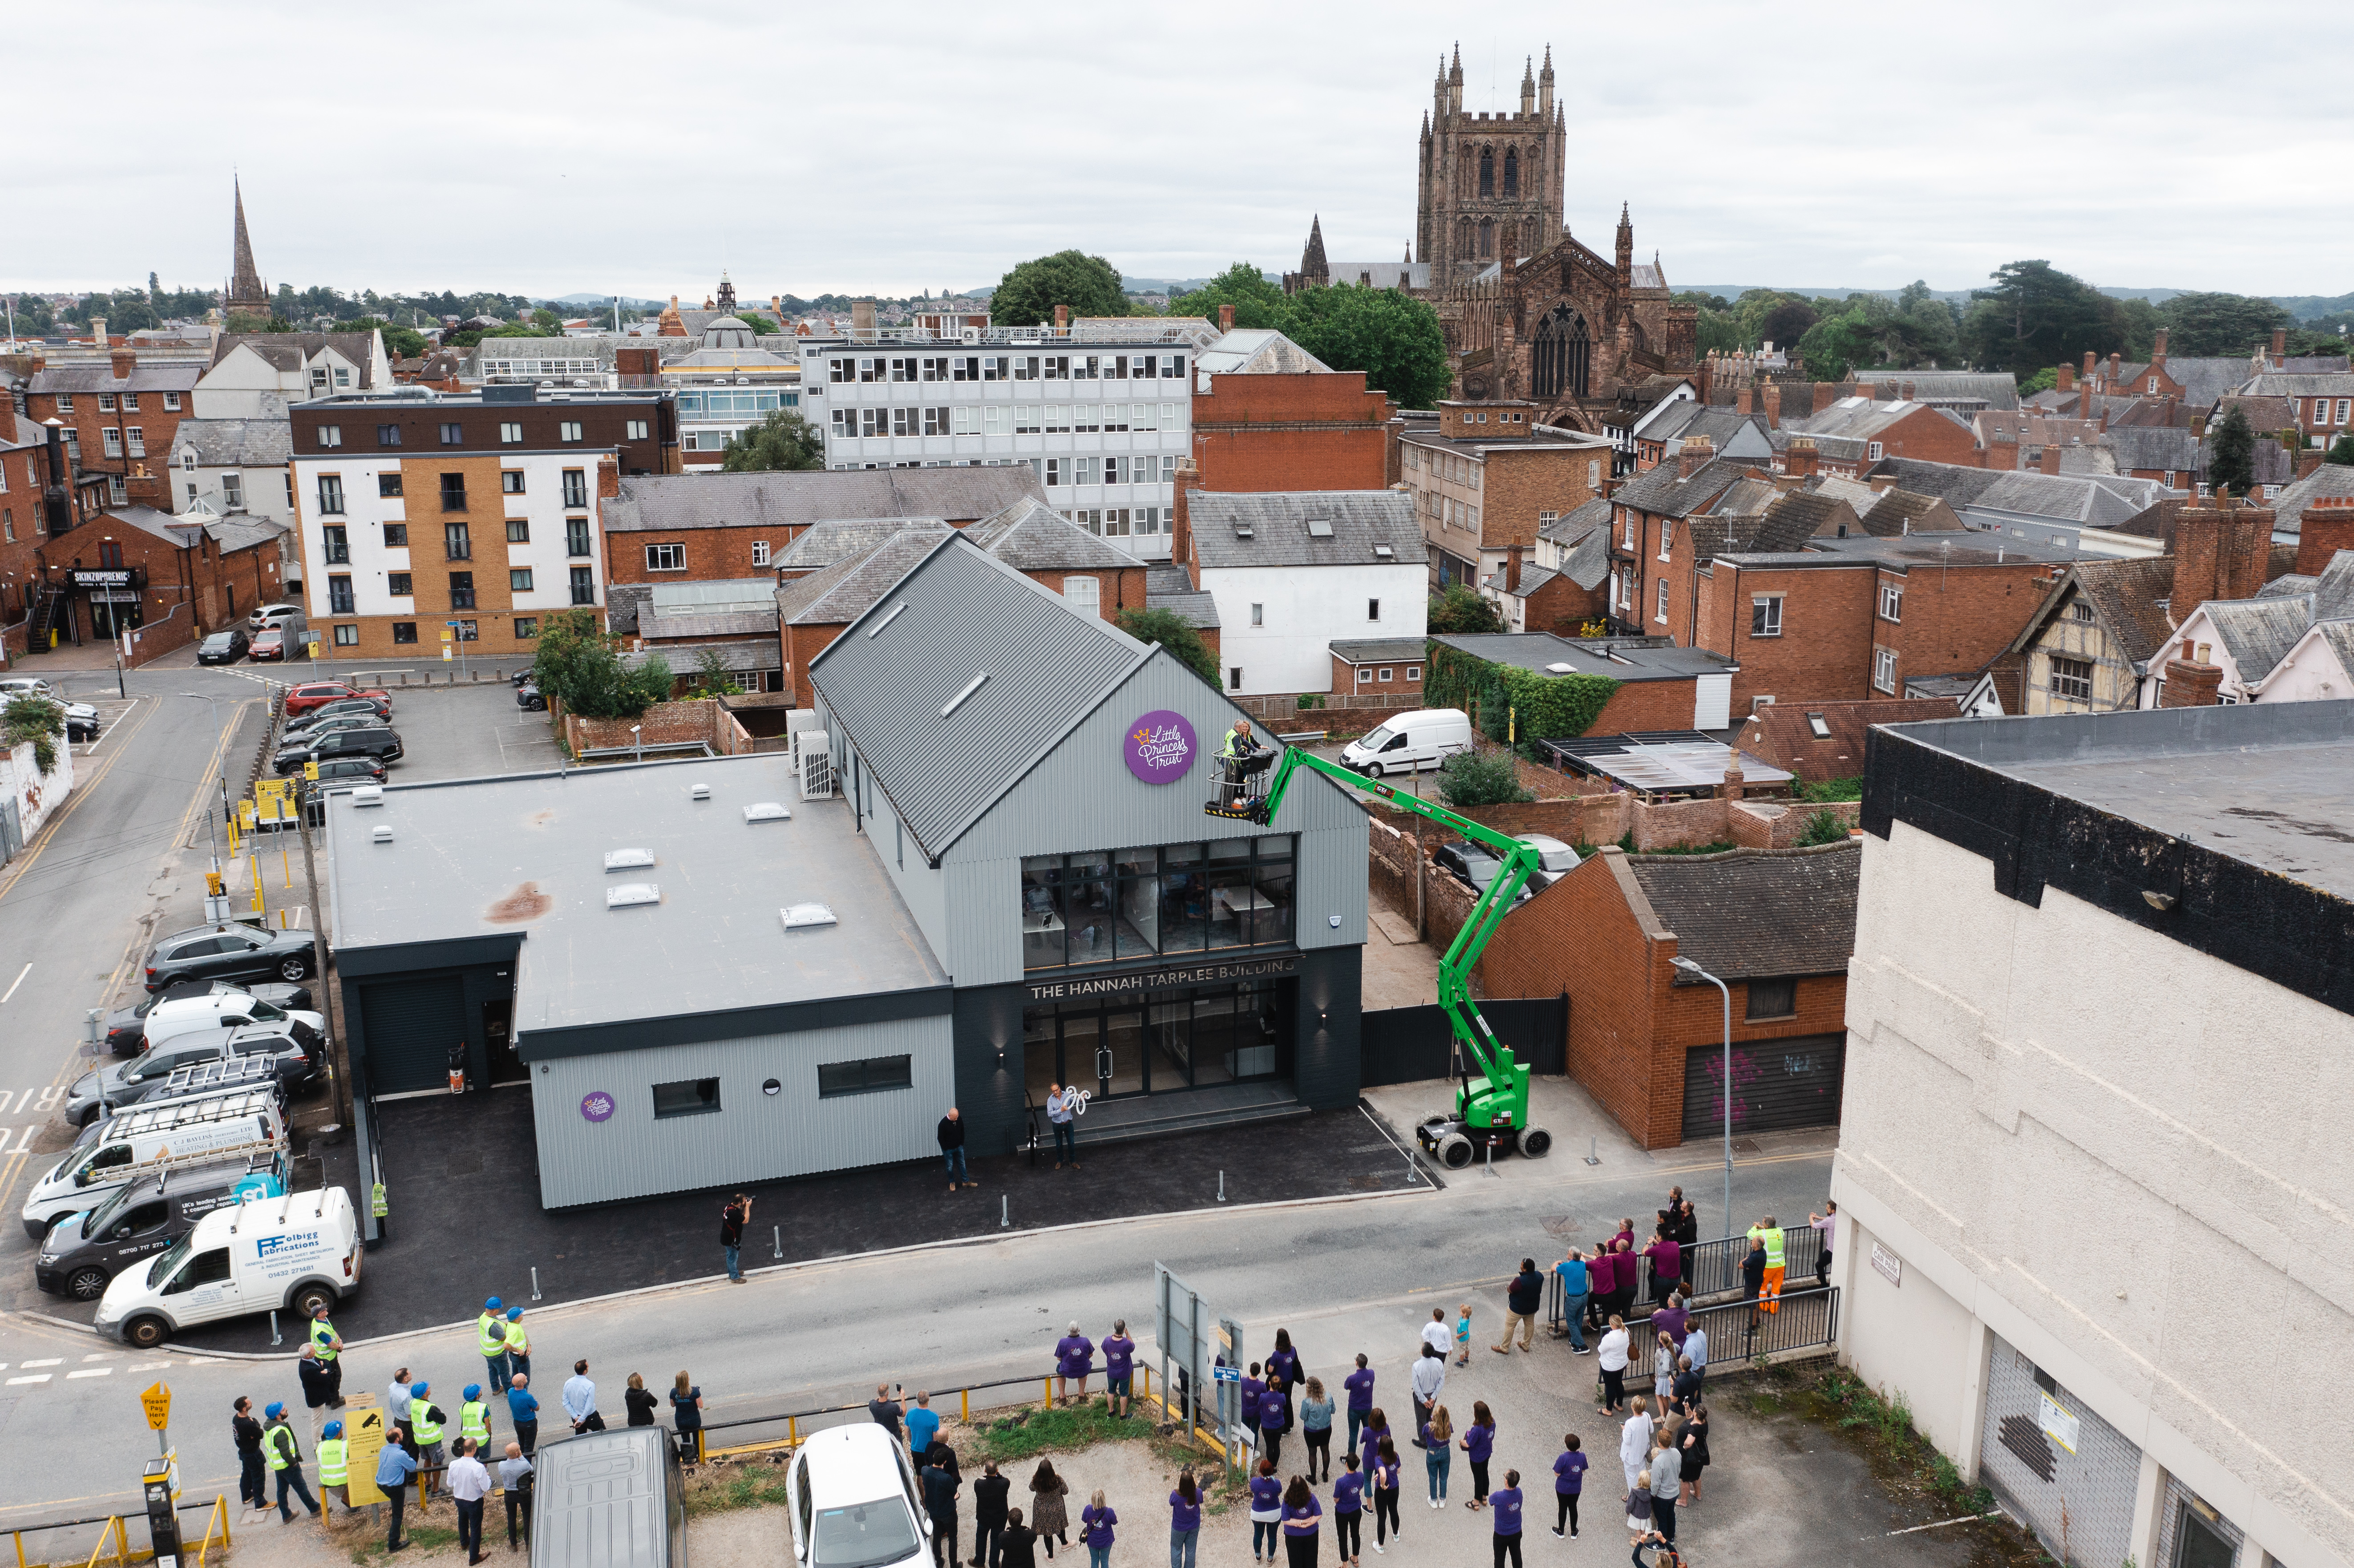 Our new home is in the heart of Hereford - the city where our charity was born.